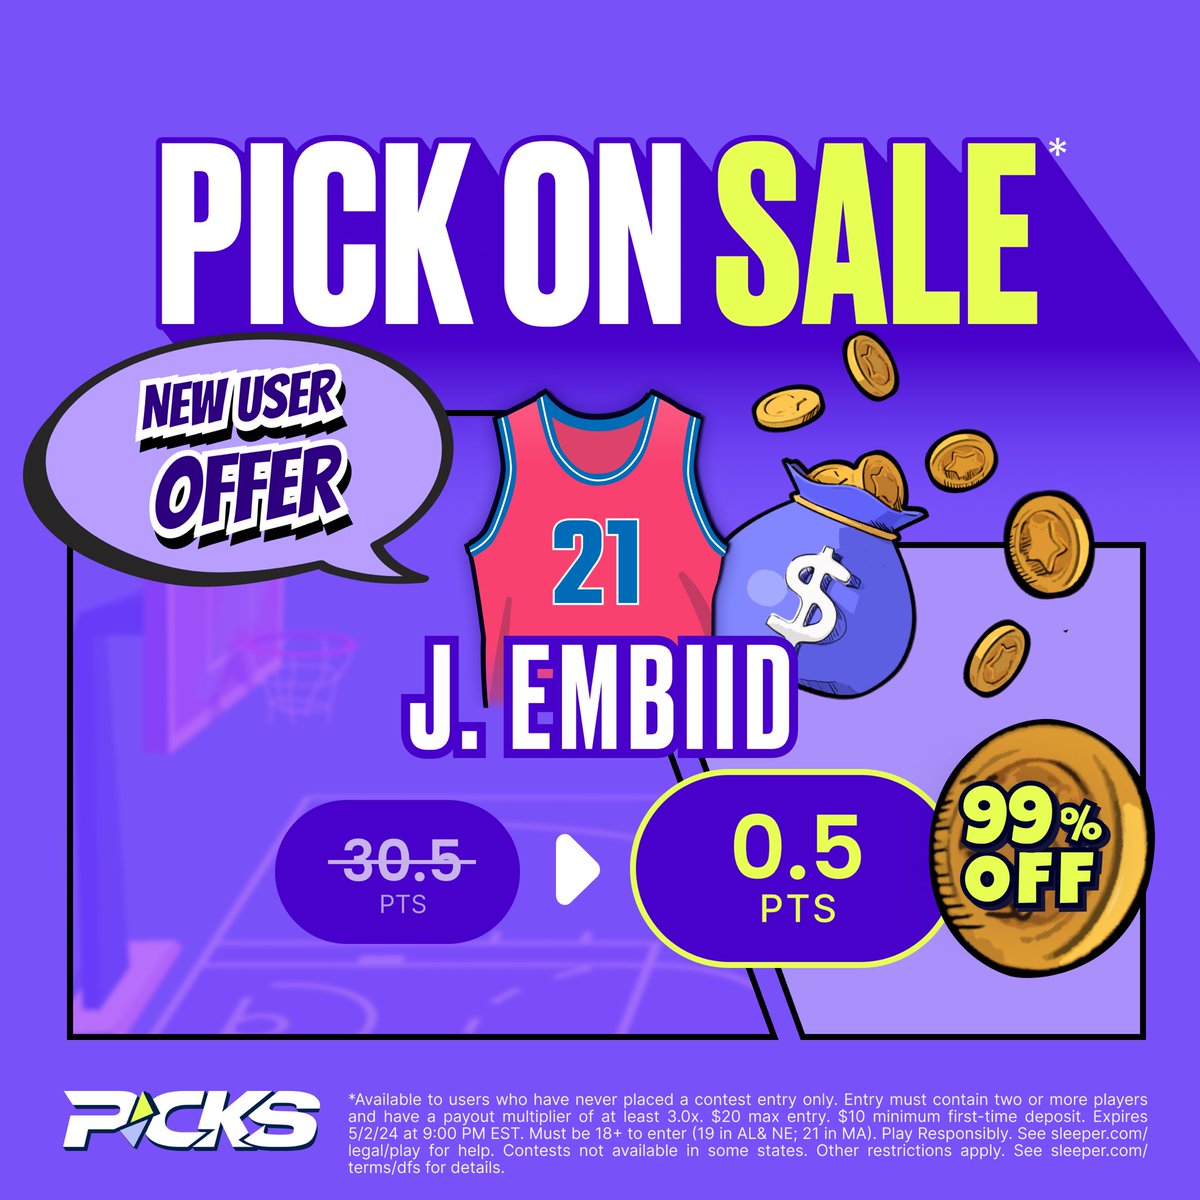 Free Pick on Sleeper for NEW Users Tonight🔒 Joel Embiid OVER 0.5 Points Code FTN for up to $500 Deposit Bonus⤵️ sleeper.com/promo/FTN